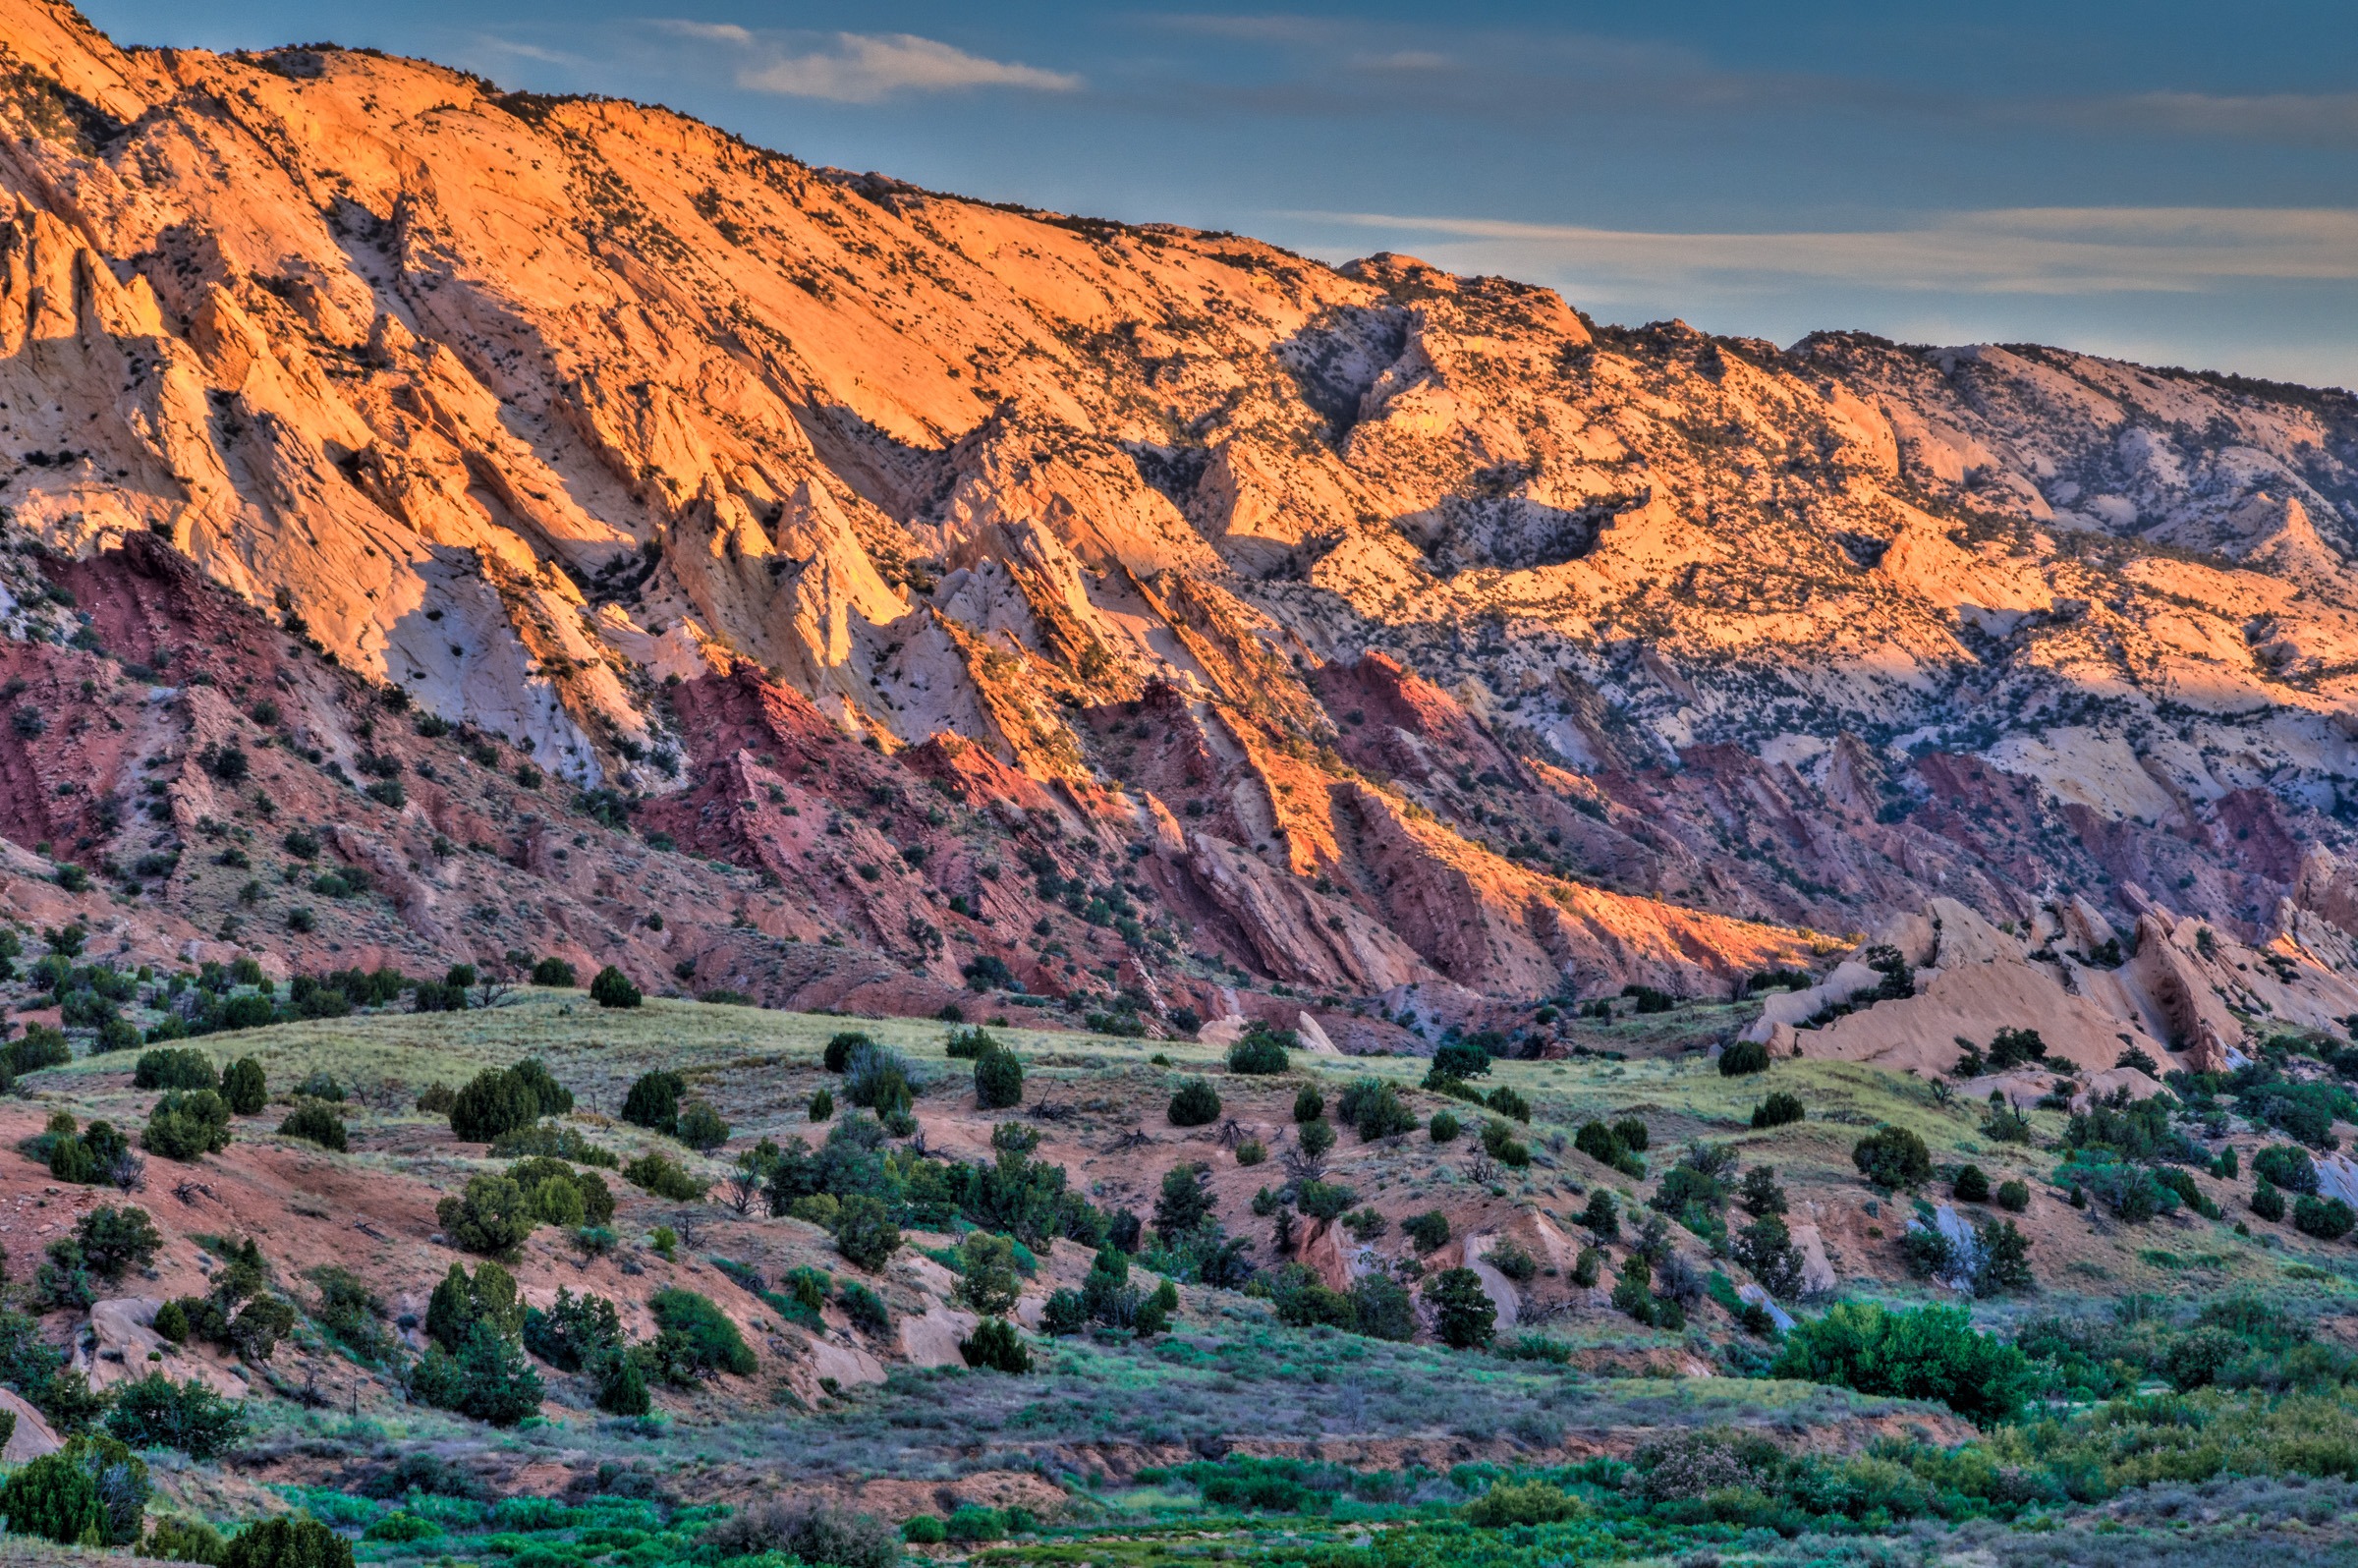 Dawn adds color in the Strike Valley of the Waterpocket fold in Capitol Reef National Park, Utah.